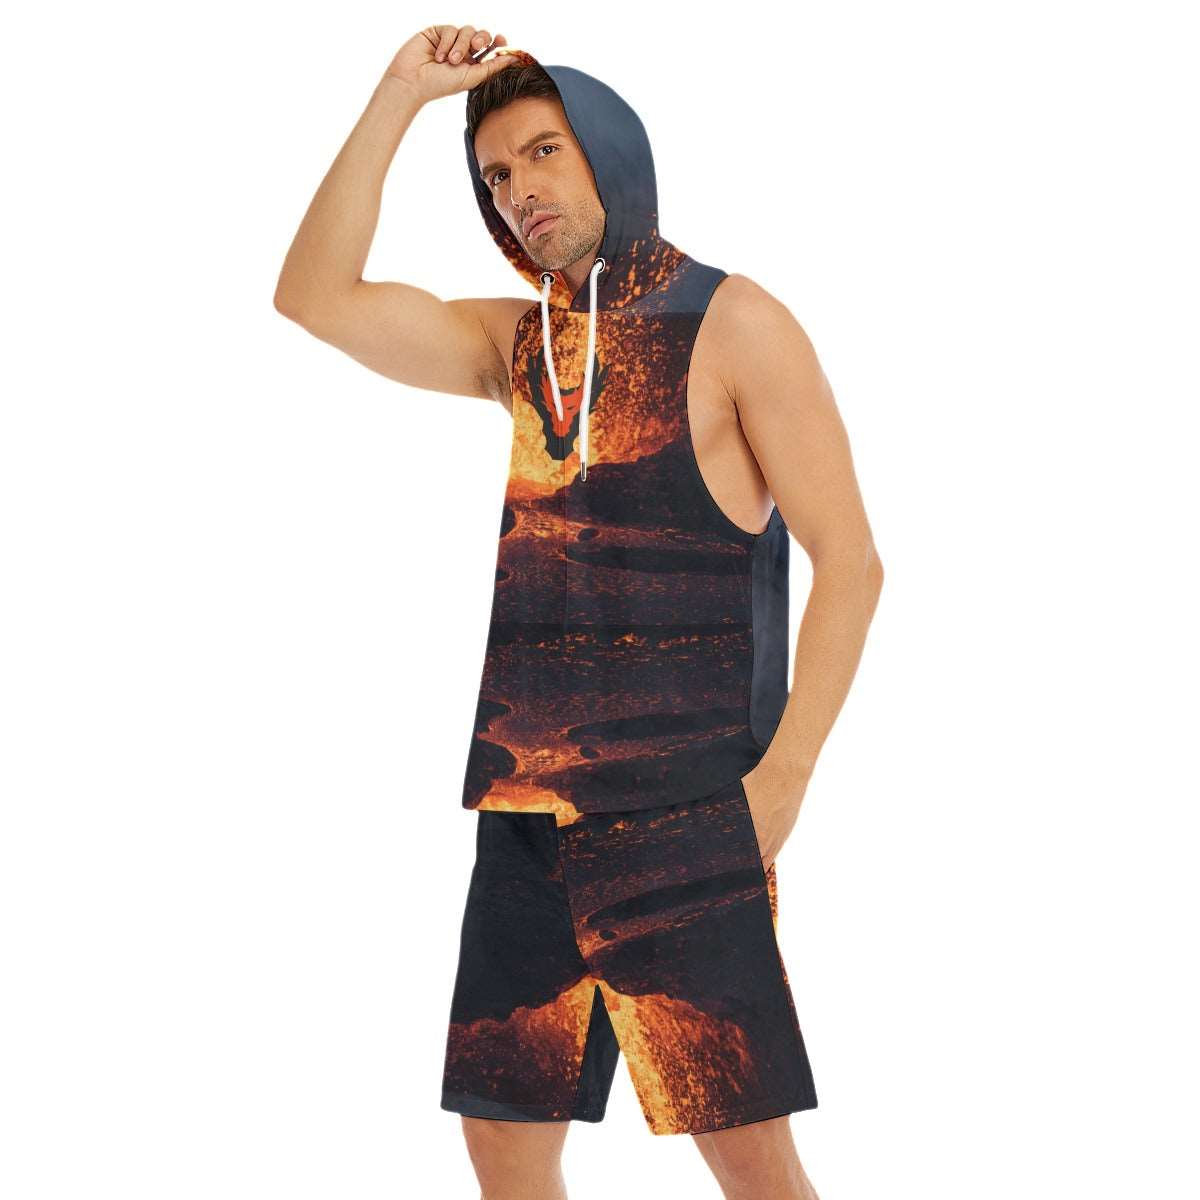 Fired up double dragon Men's Sleeveless Vest And Shorts Sets